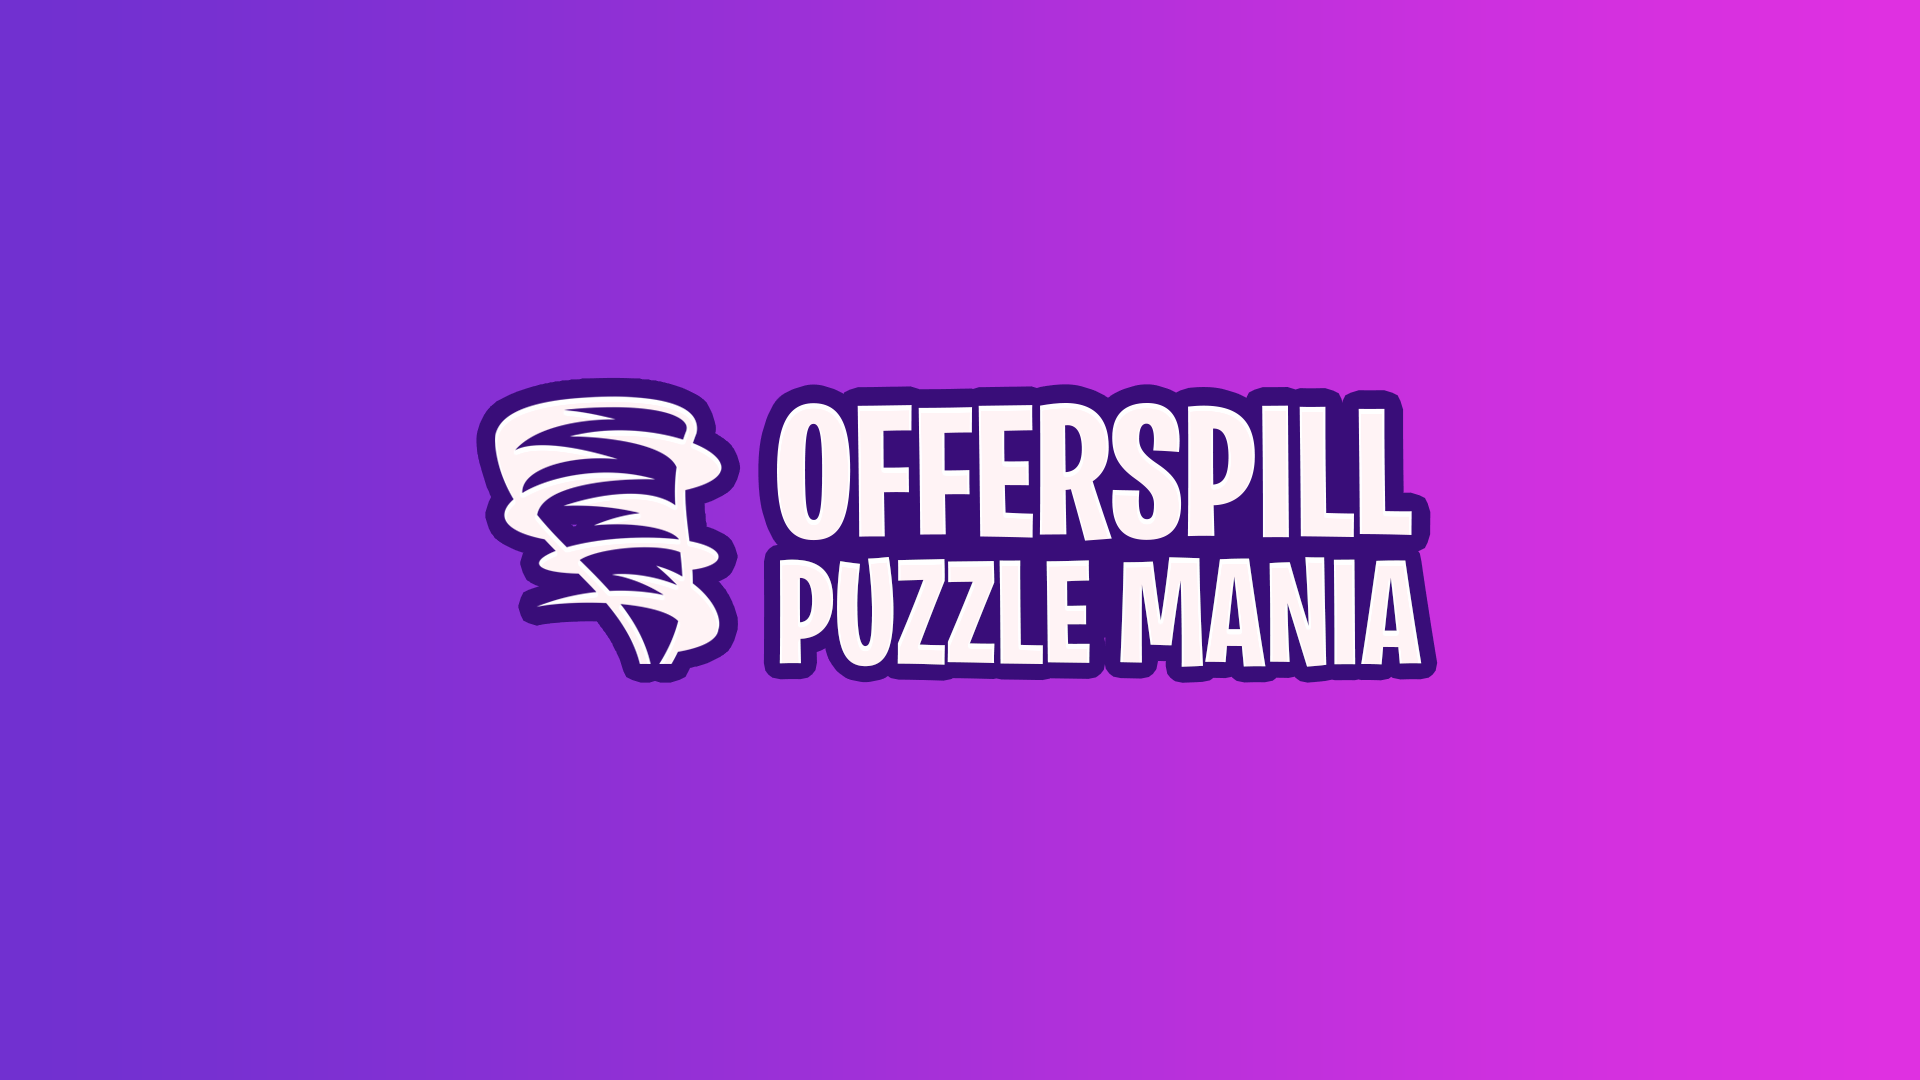 Offerspill Puzzlemania